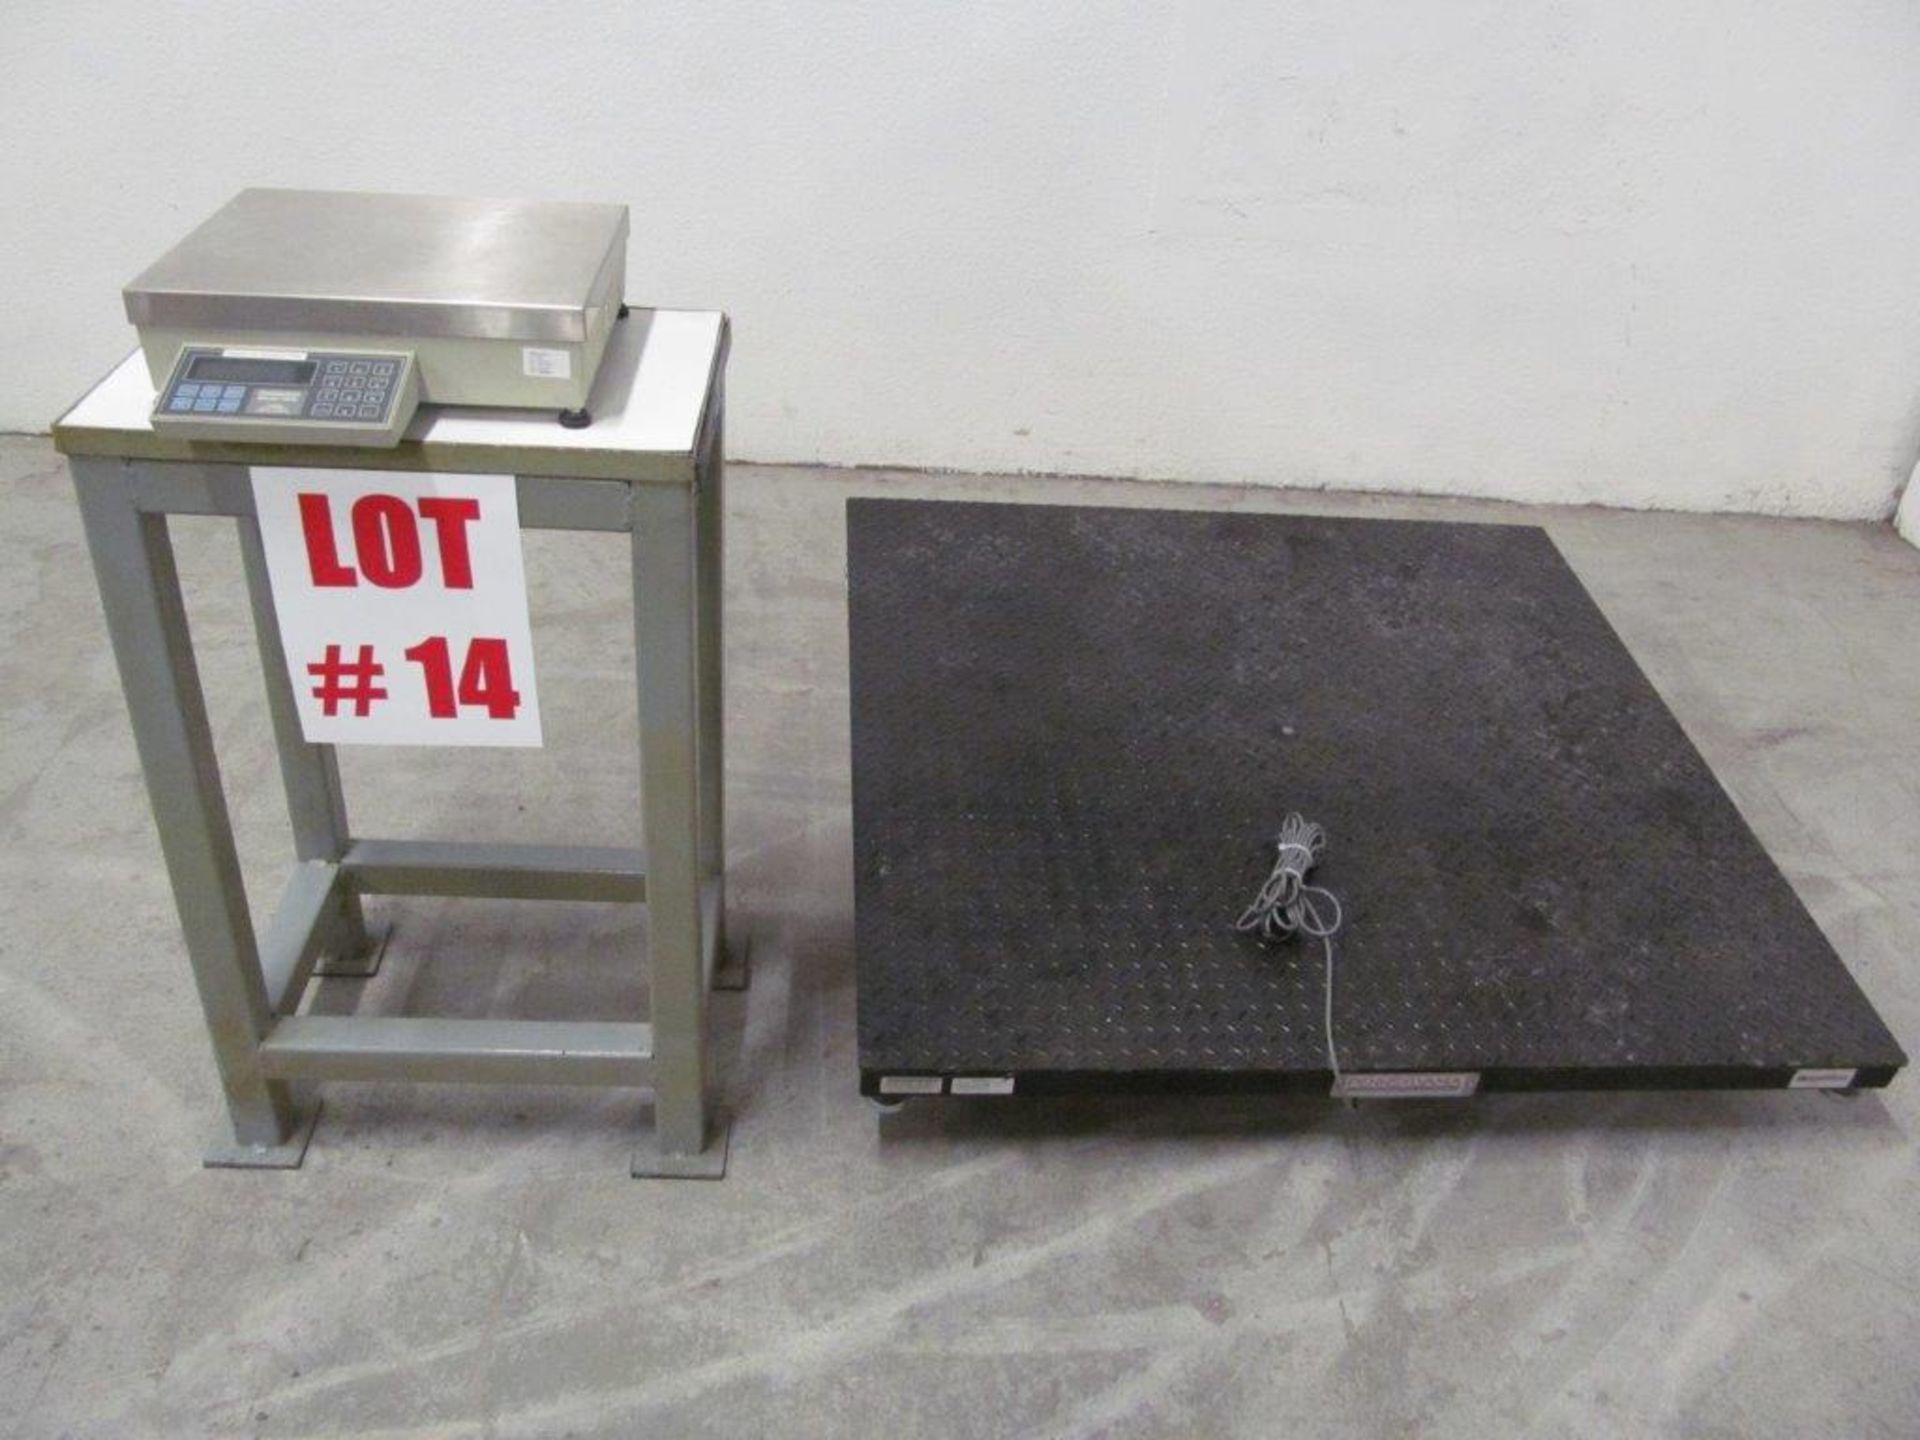 PENNSYLVANIA ELECTRONIC SCALE MODEL: 6600, 5000 LBS CAPACITY, 4 FT X 4 FT PLATE